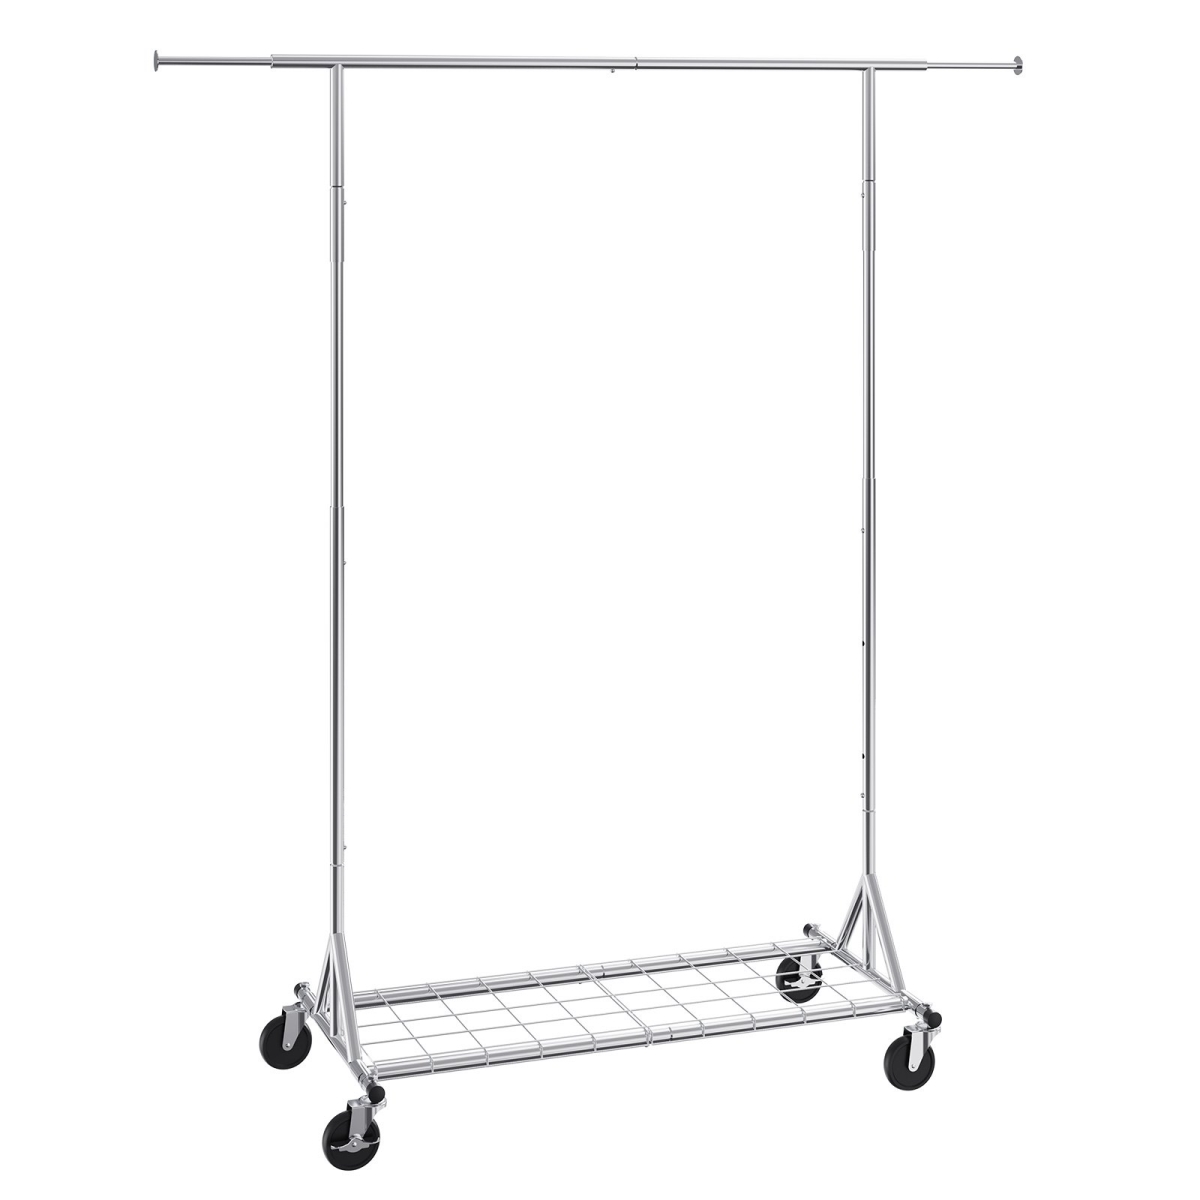 Picture of Vevor JYKCYJ4858111TUHJV0 450 lbs Heavy Duty Clothing Garment Rack with Wheels